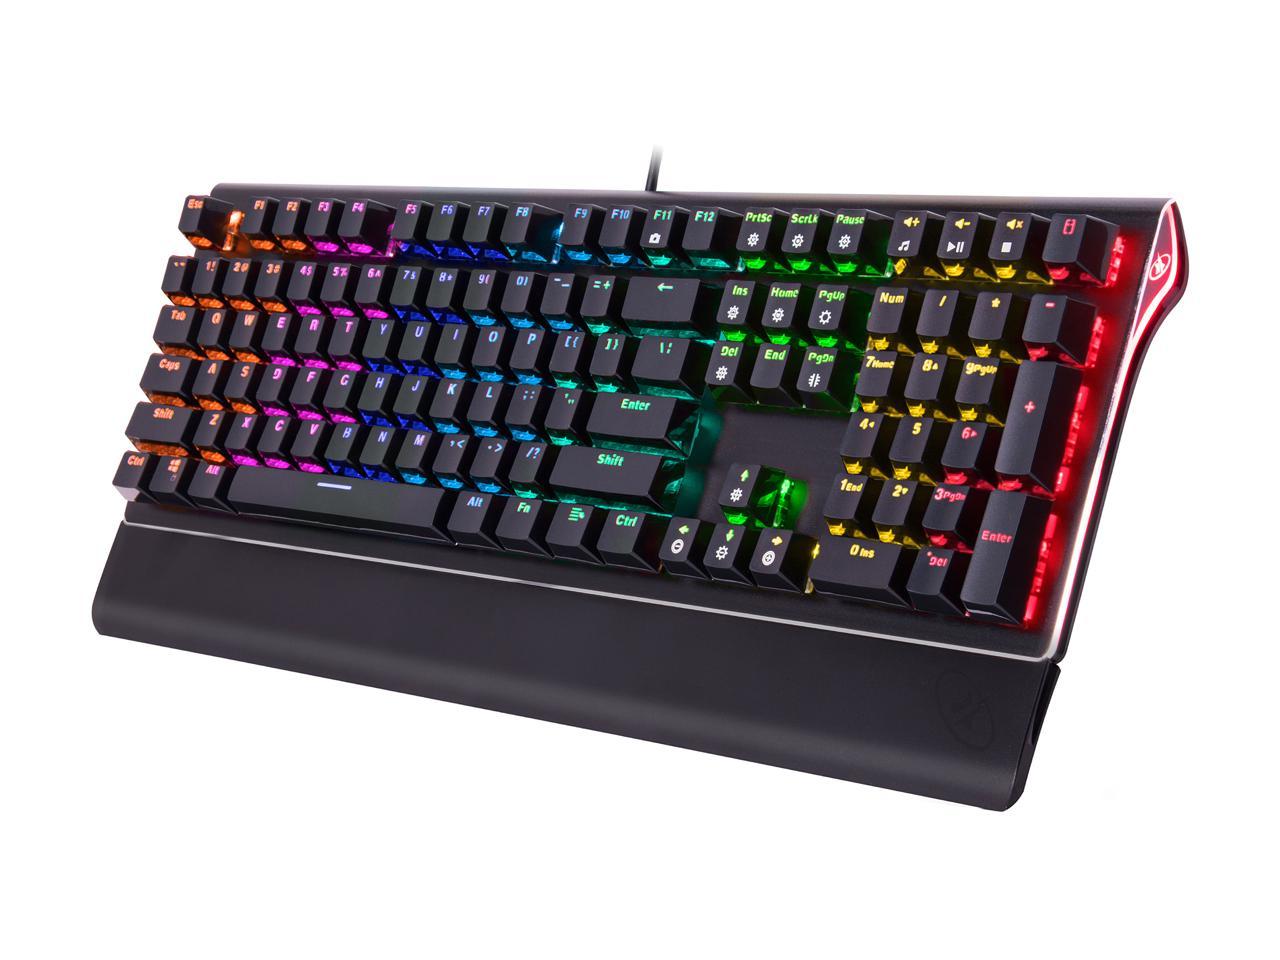 Blue Switches 22 RGB Backlit Modes NEON Rosewill Mechanical Gaming Keyboard 